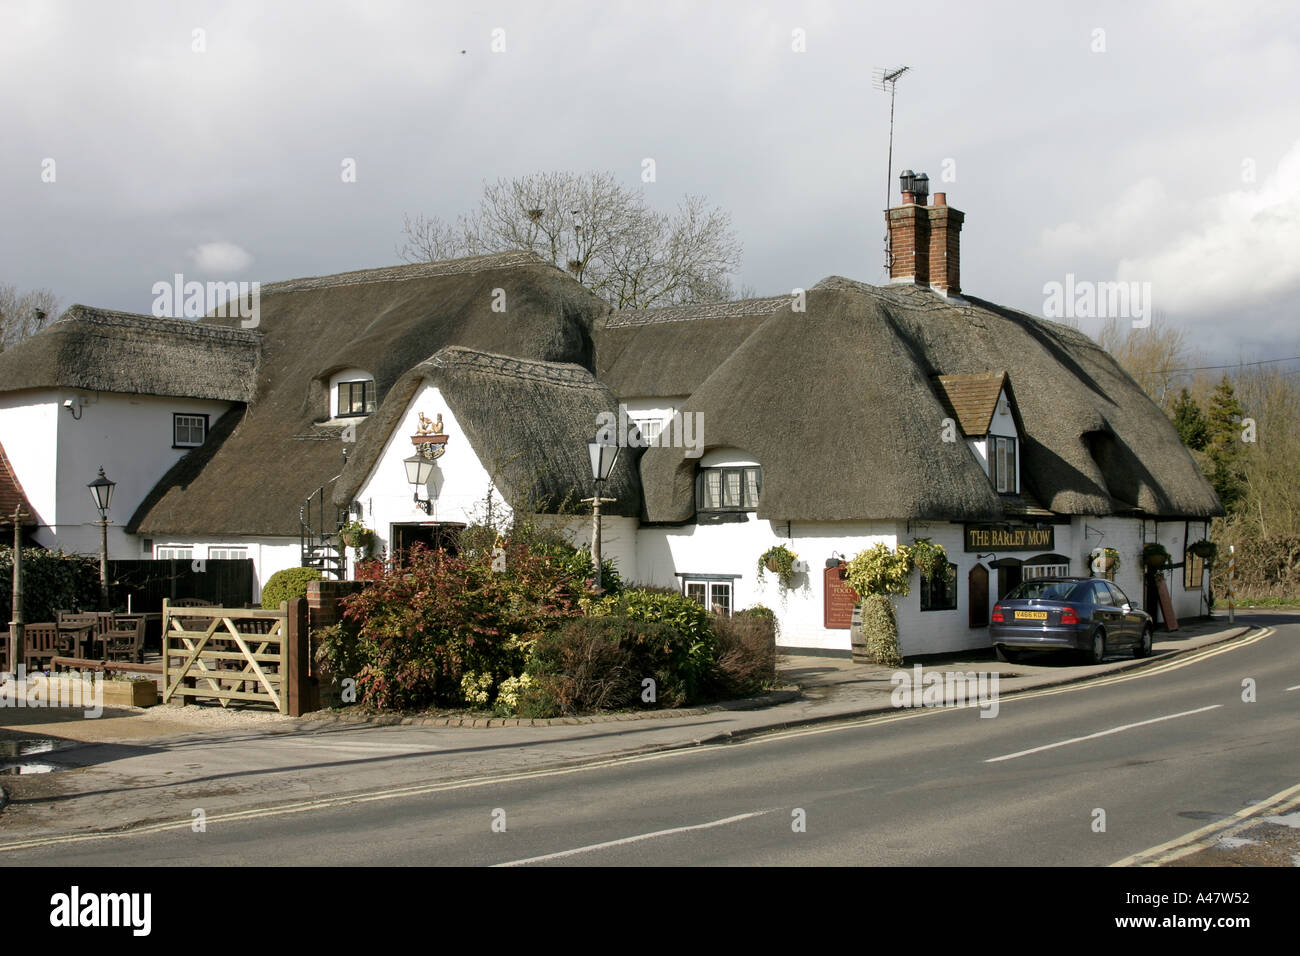 The old Barley Mow pub with thatched roof at Clifton Hampden Oxfordshire England Stock Photo